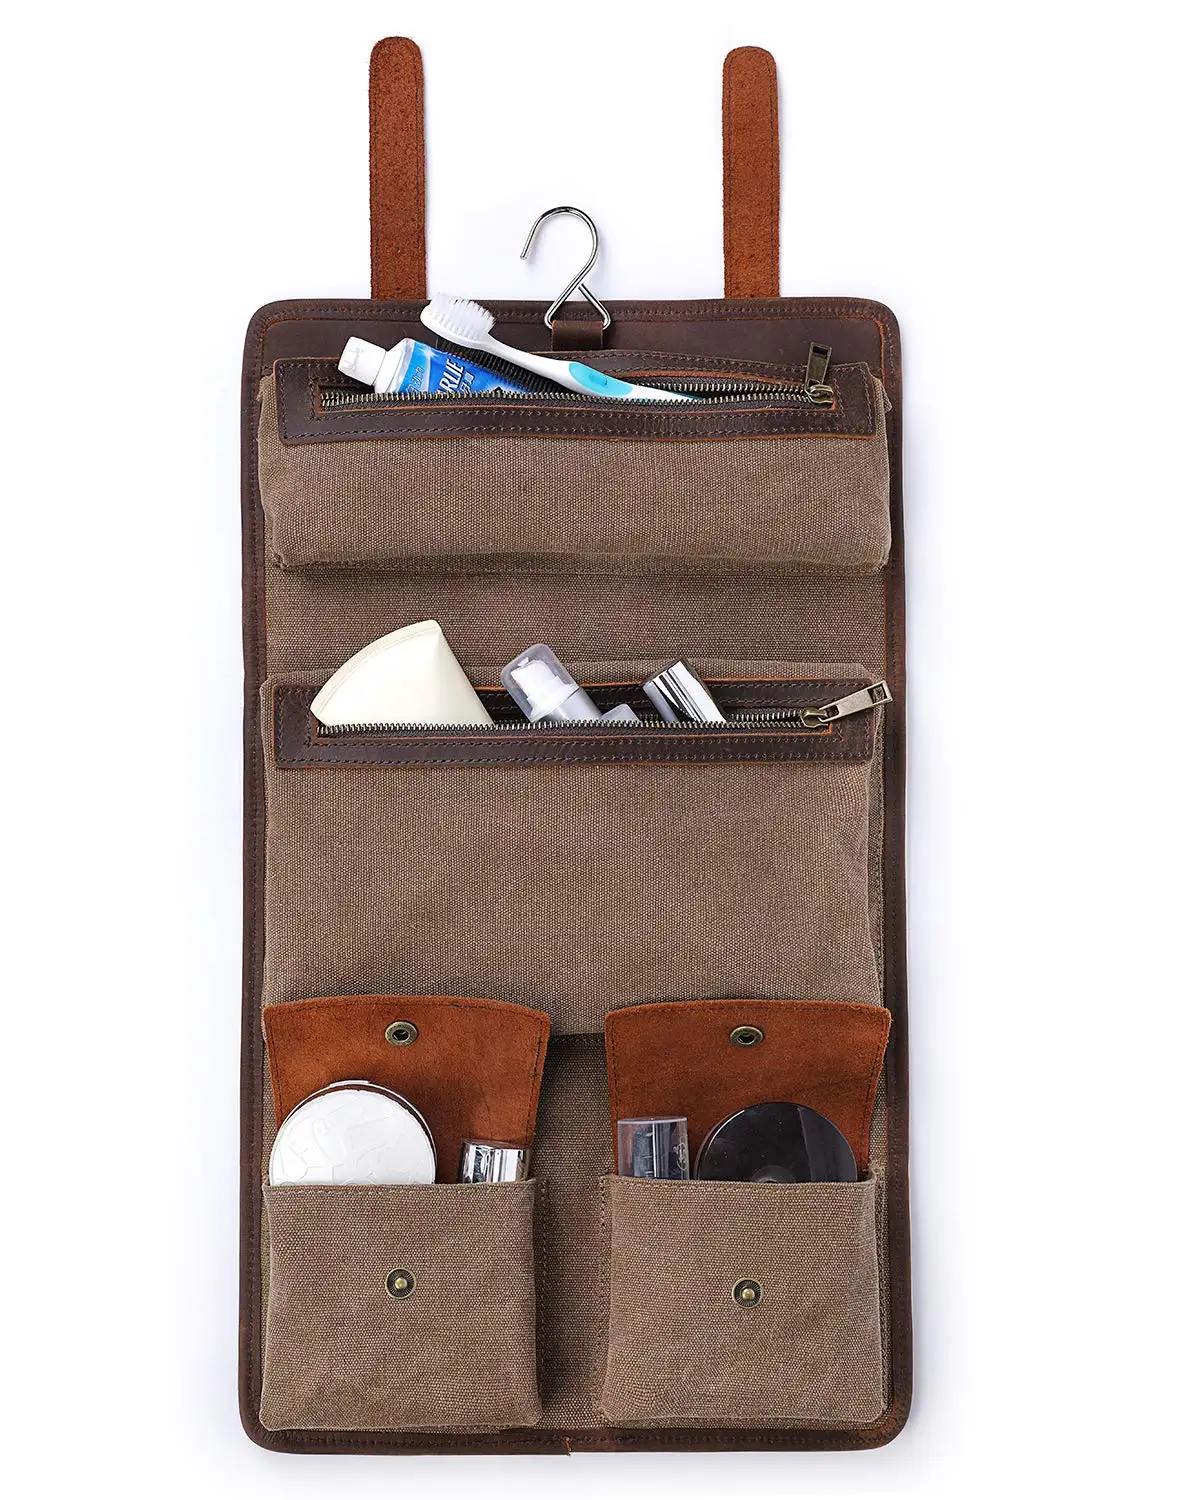 

In Stock Men And Women foldable leather organizer bag heavy duty canvas waterproof hanging travel toiletry bag, Customized